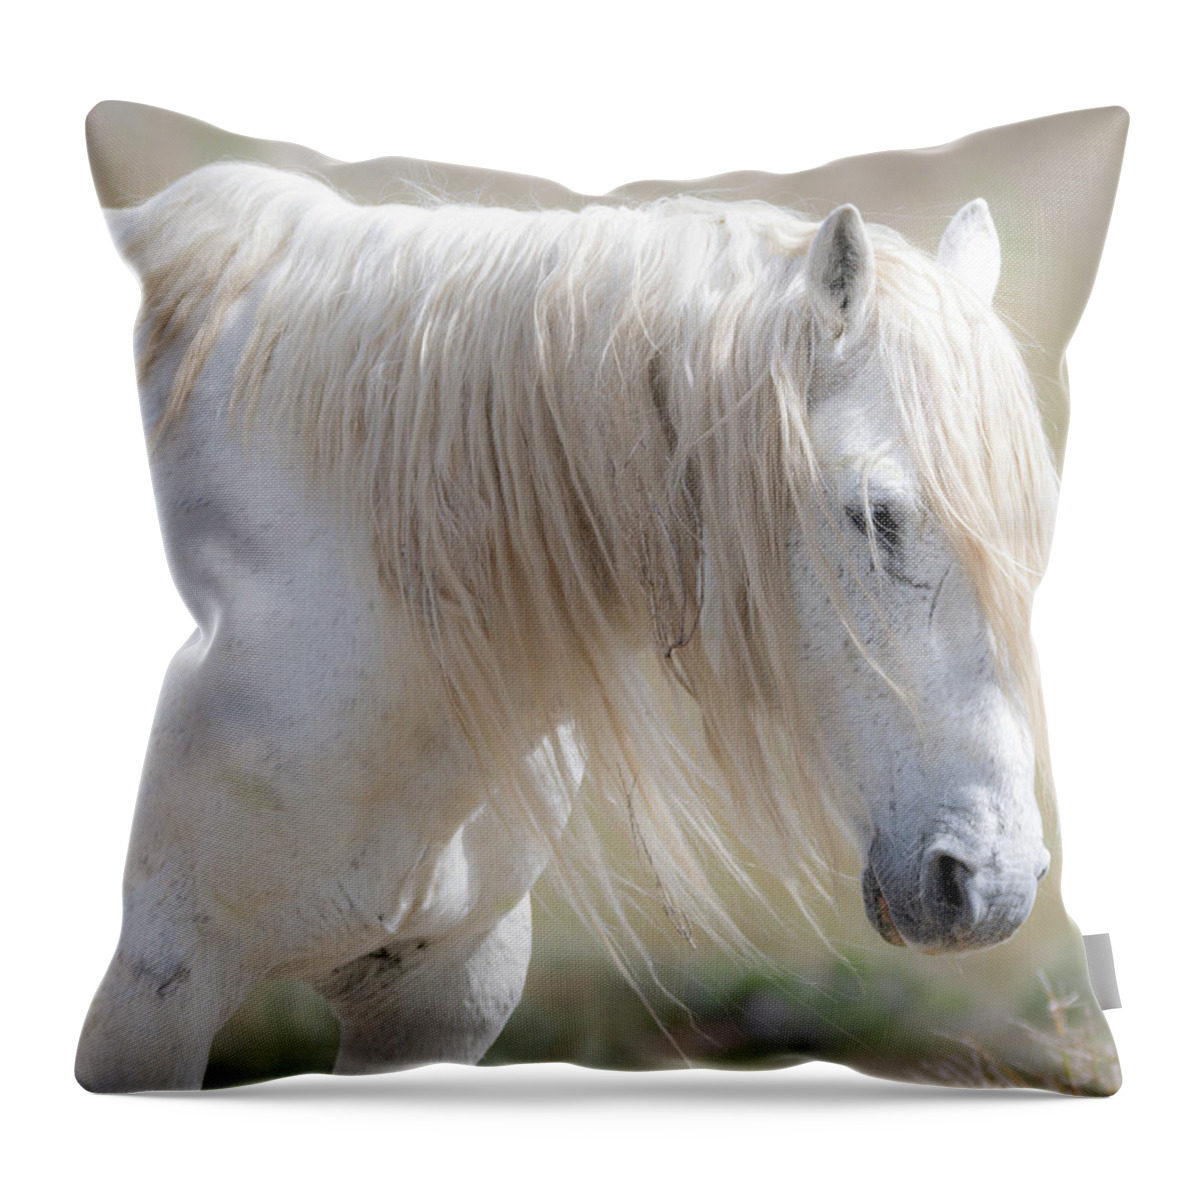 Wild Horses Throw Pillow featuring the photograph Weary by Mary Hone